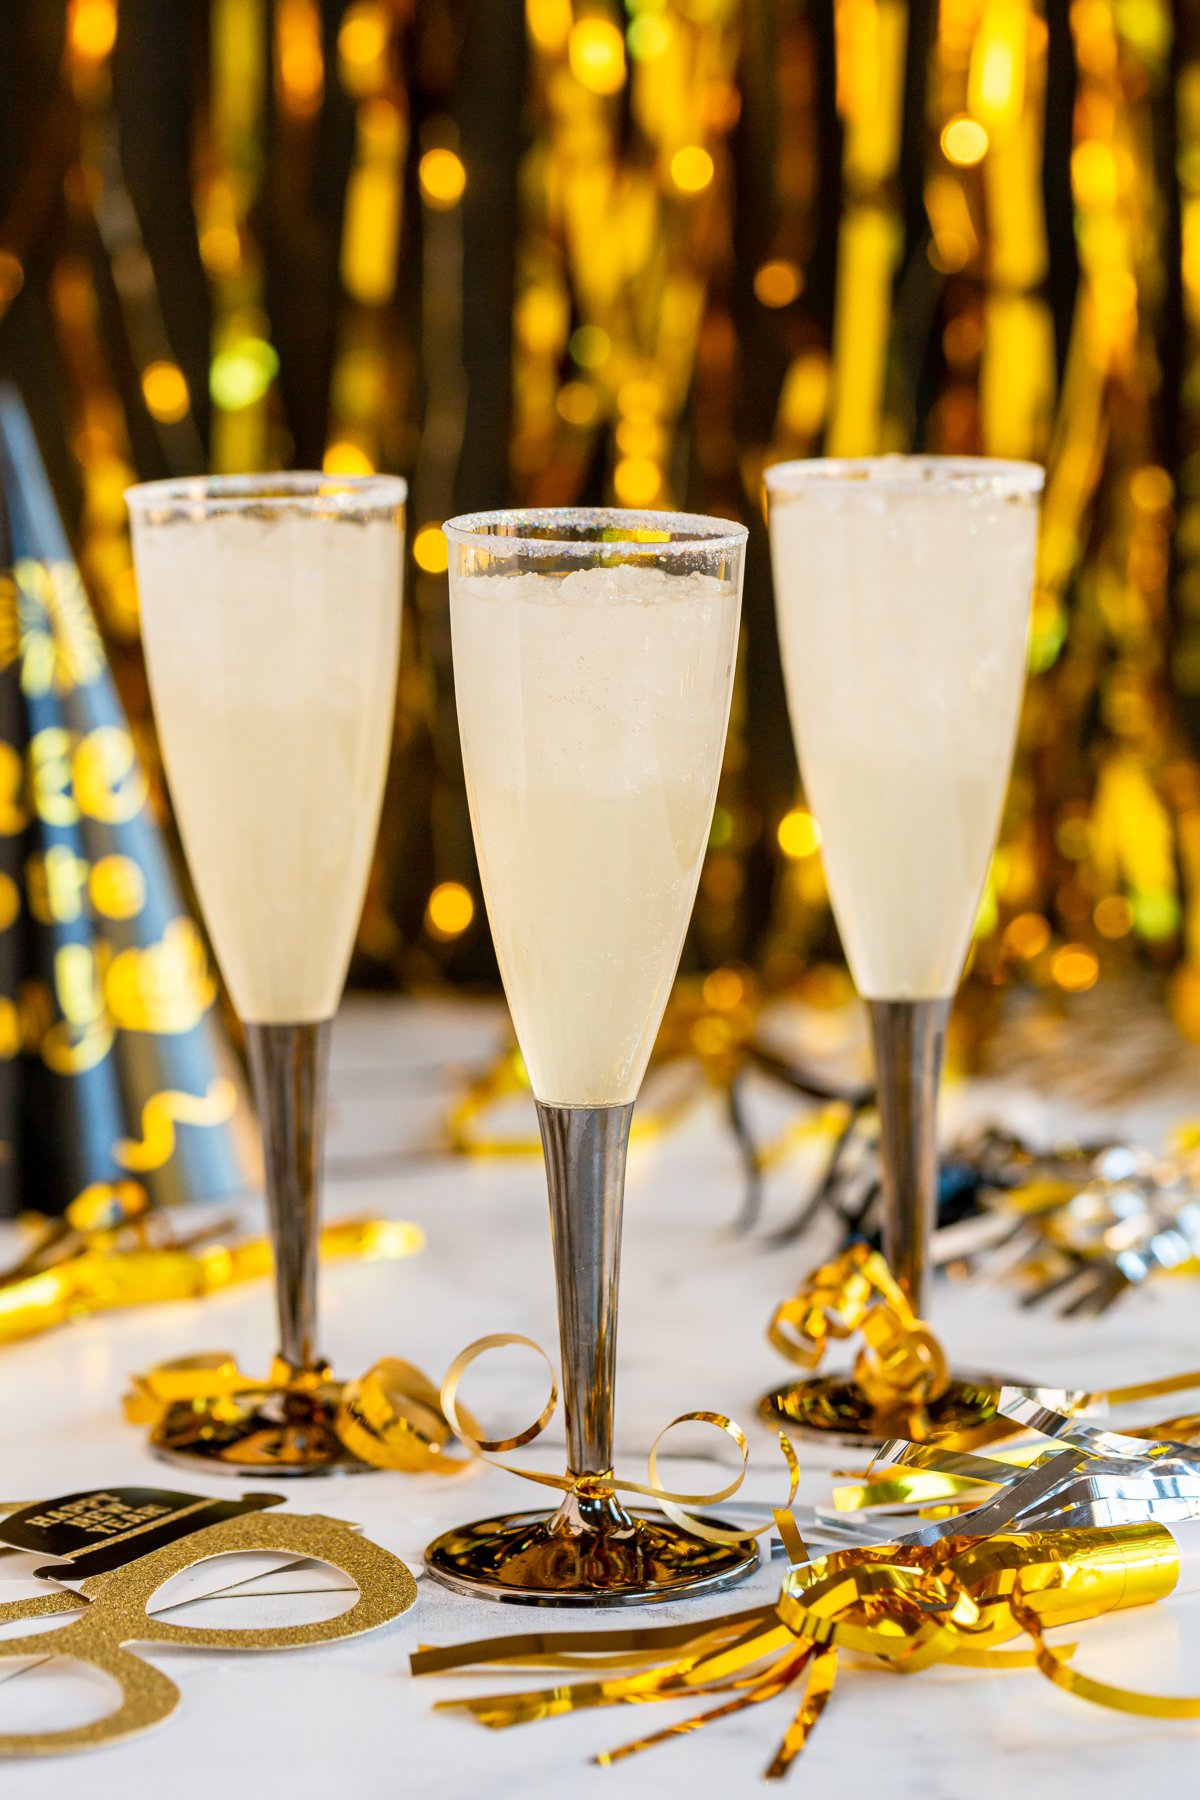 Champagne glasses with New Year's Eve punch